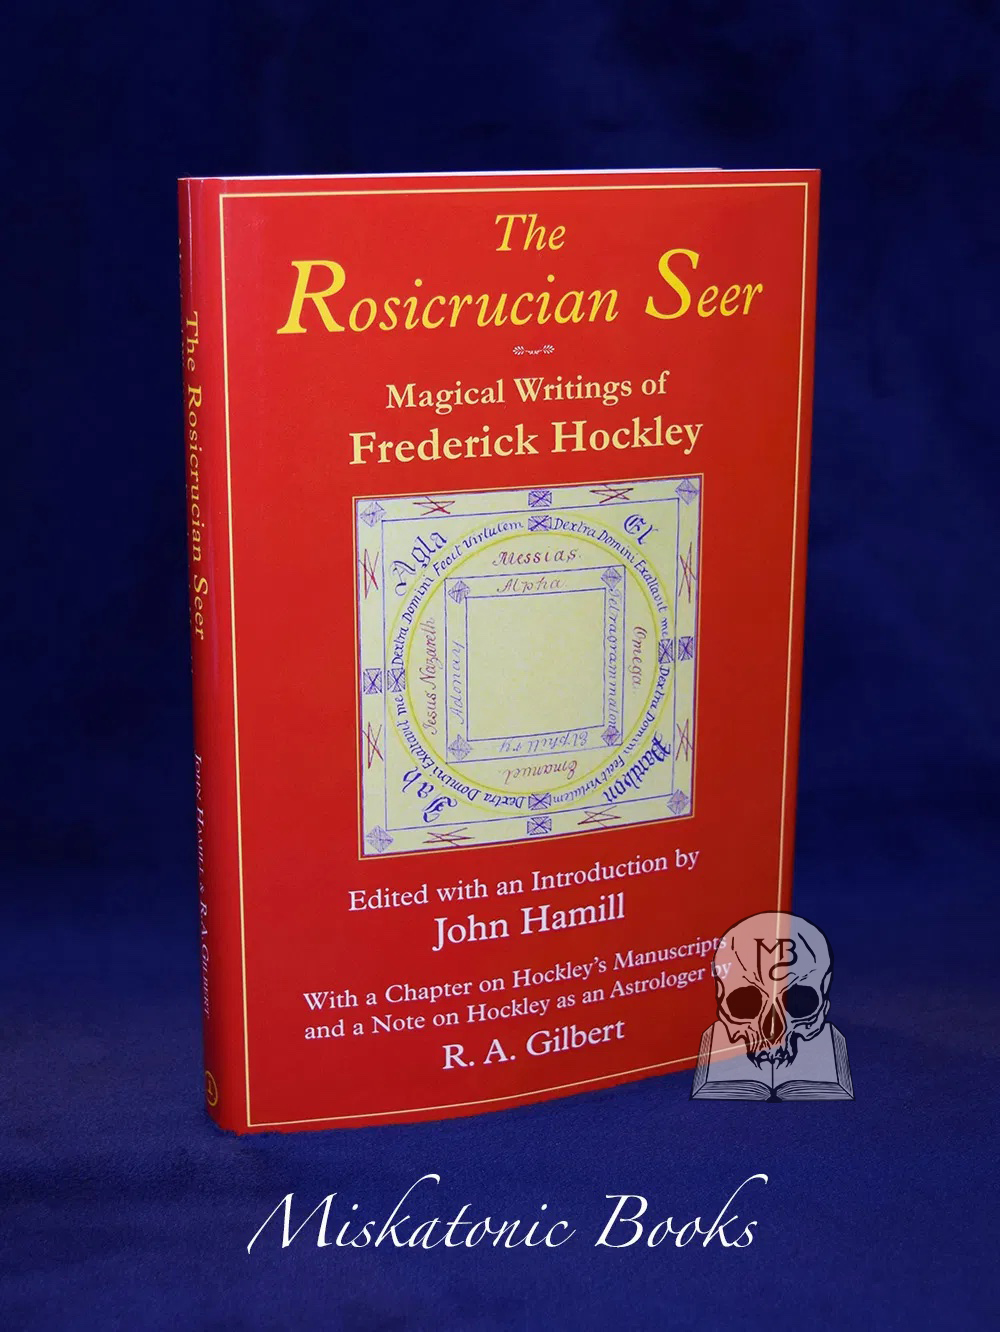 THE ROSICRUCIAN SEER: Magical Writings of Frederick Hockley With a Chapter on Hockley's Manuscripts, and a Note on Hockley as an Astrologer by R.A. Gilbert - SIGNED Limited Edition Hardcover